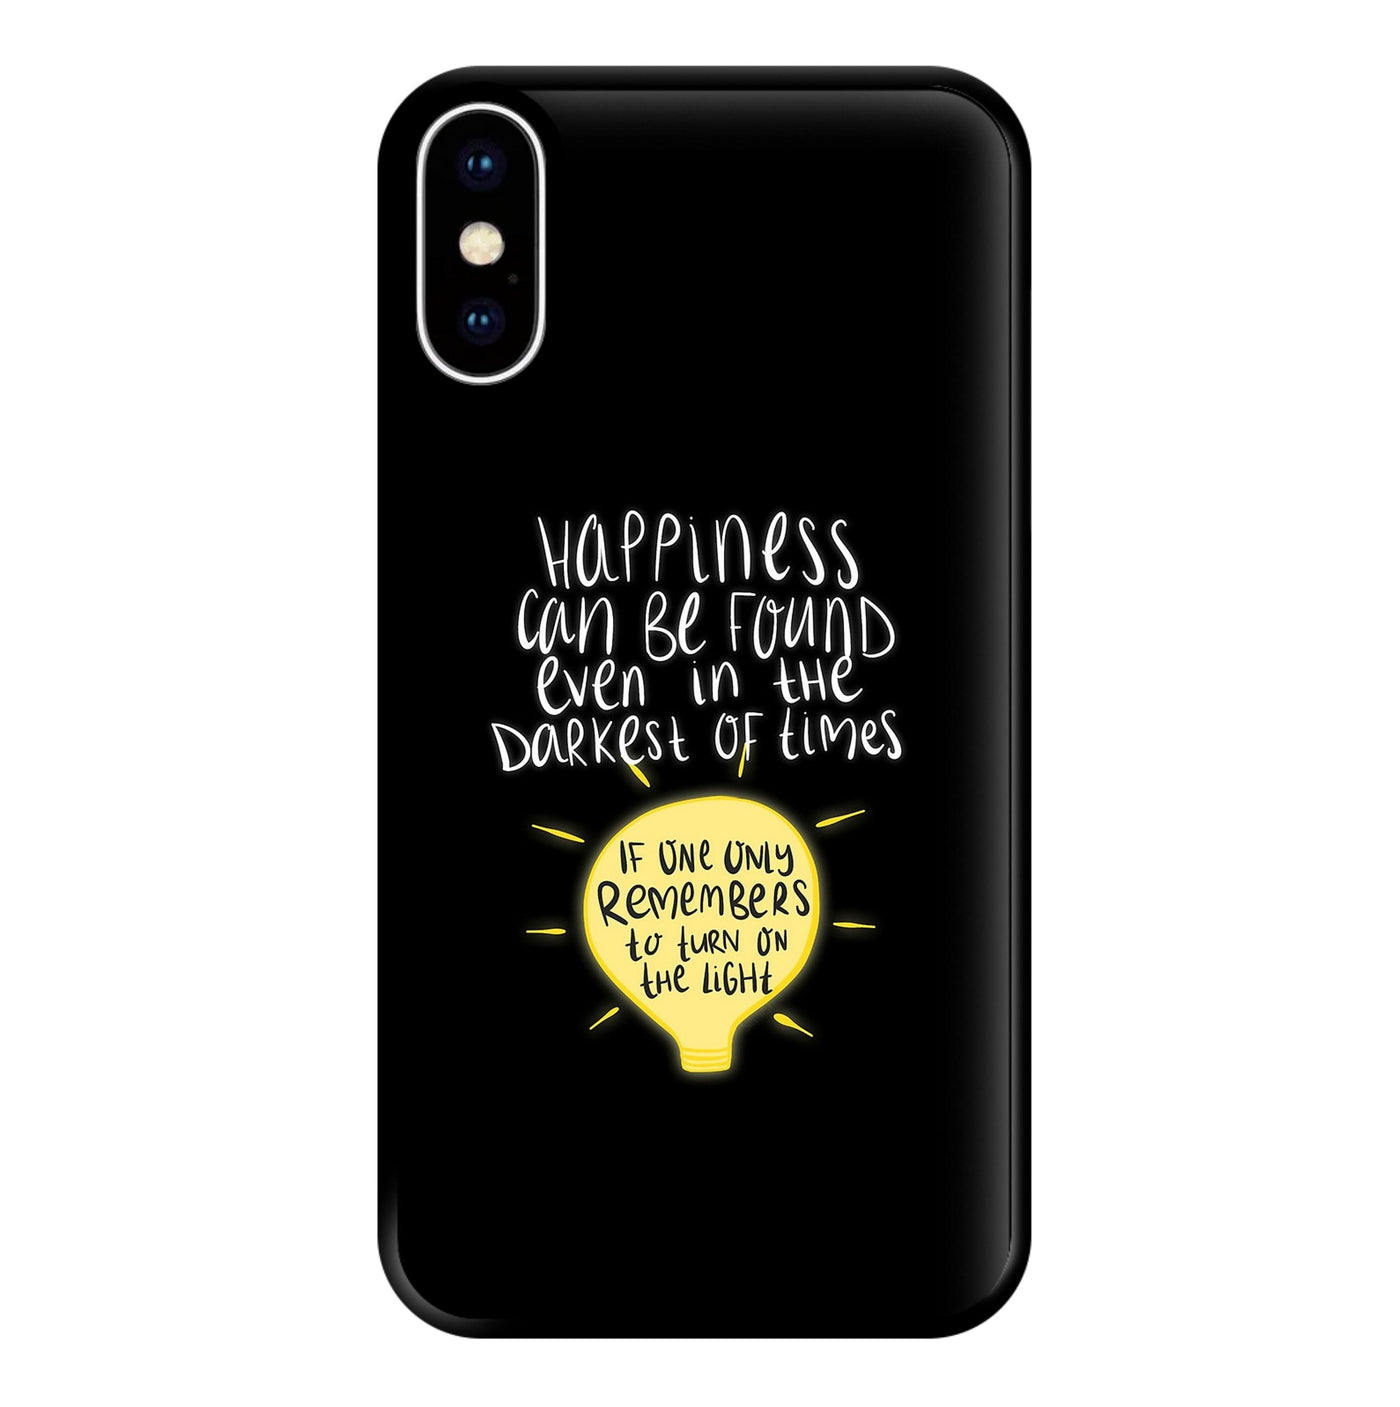 Happiness Can Be Found In The Darkest of Times - Harry Potter Phone Case